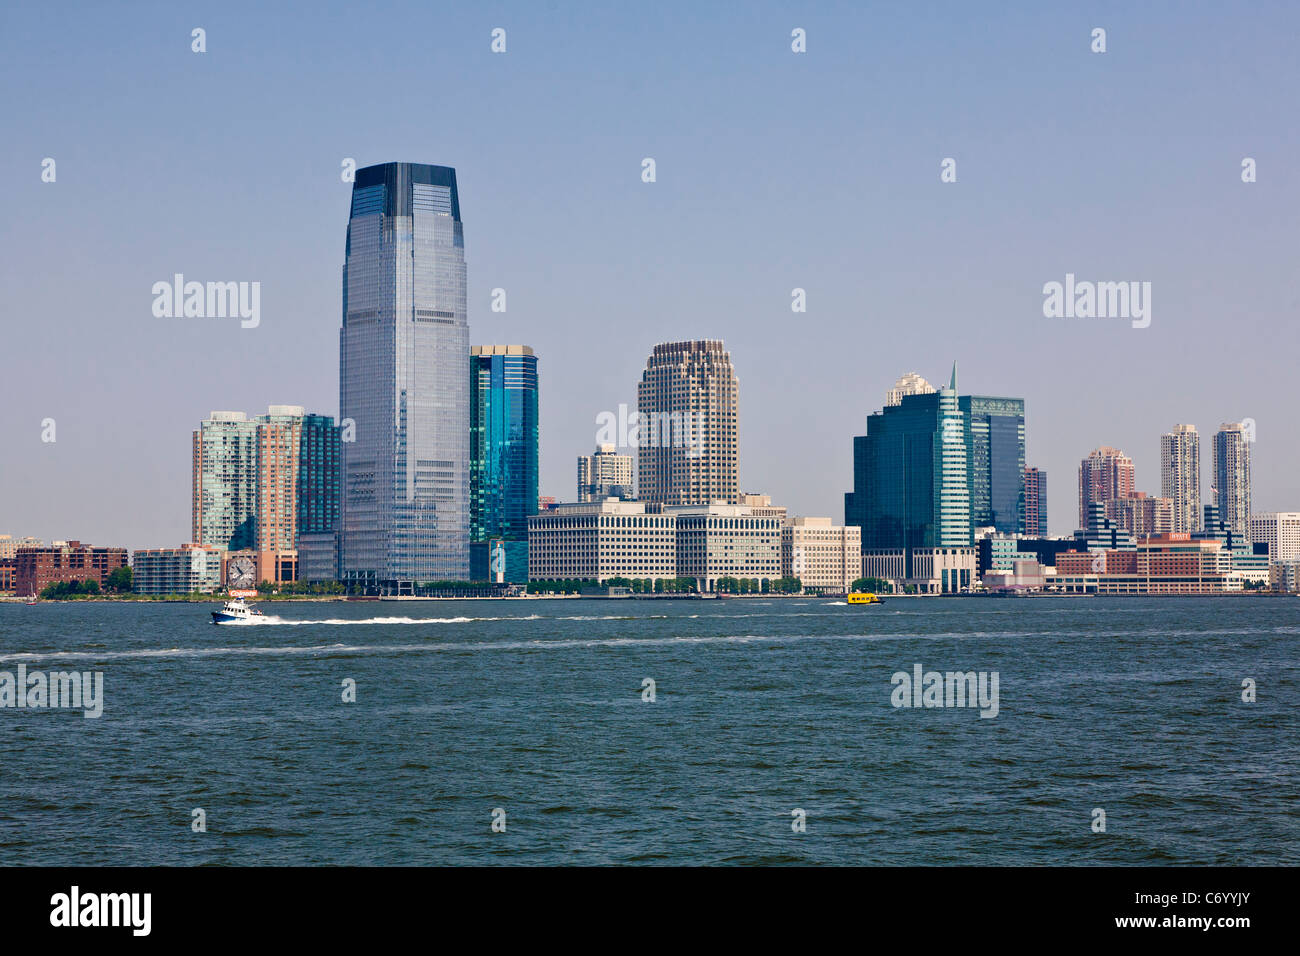 Jersey City New jersey axcross the Hudson River from Manhattan in New York City Stock Photo